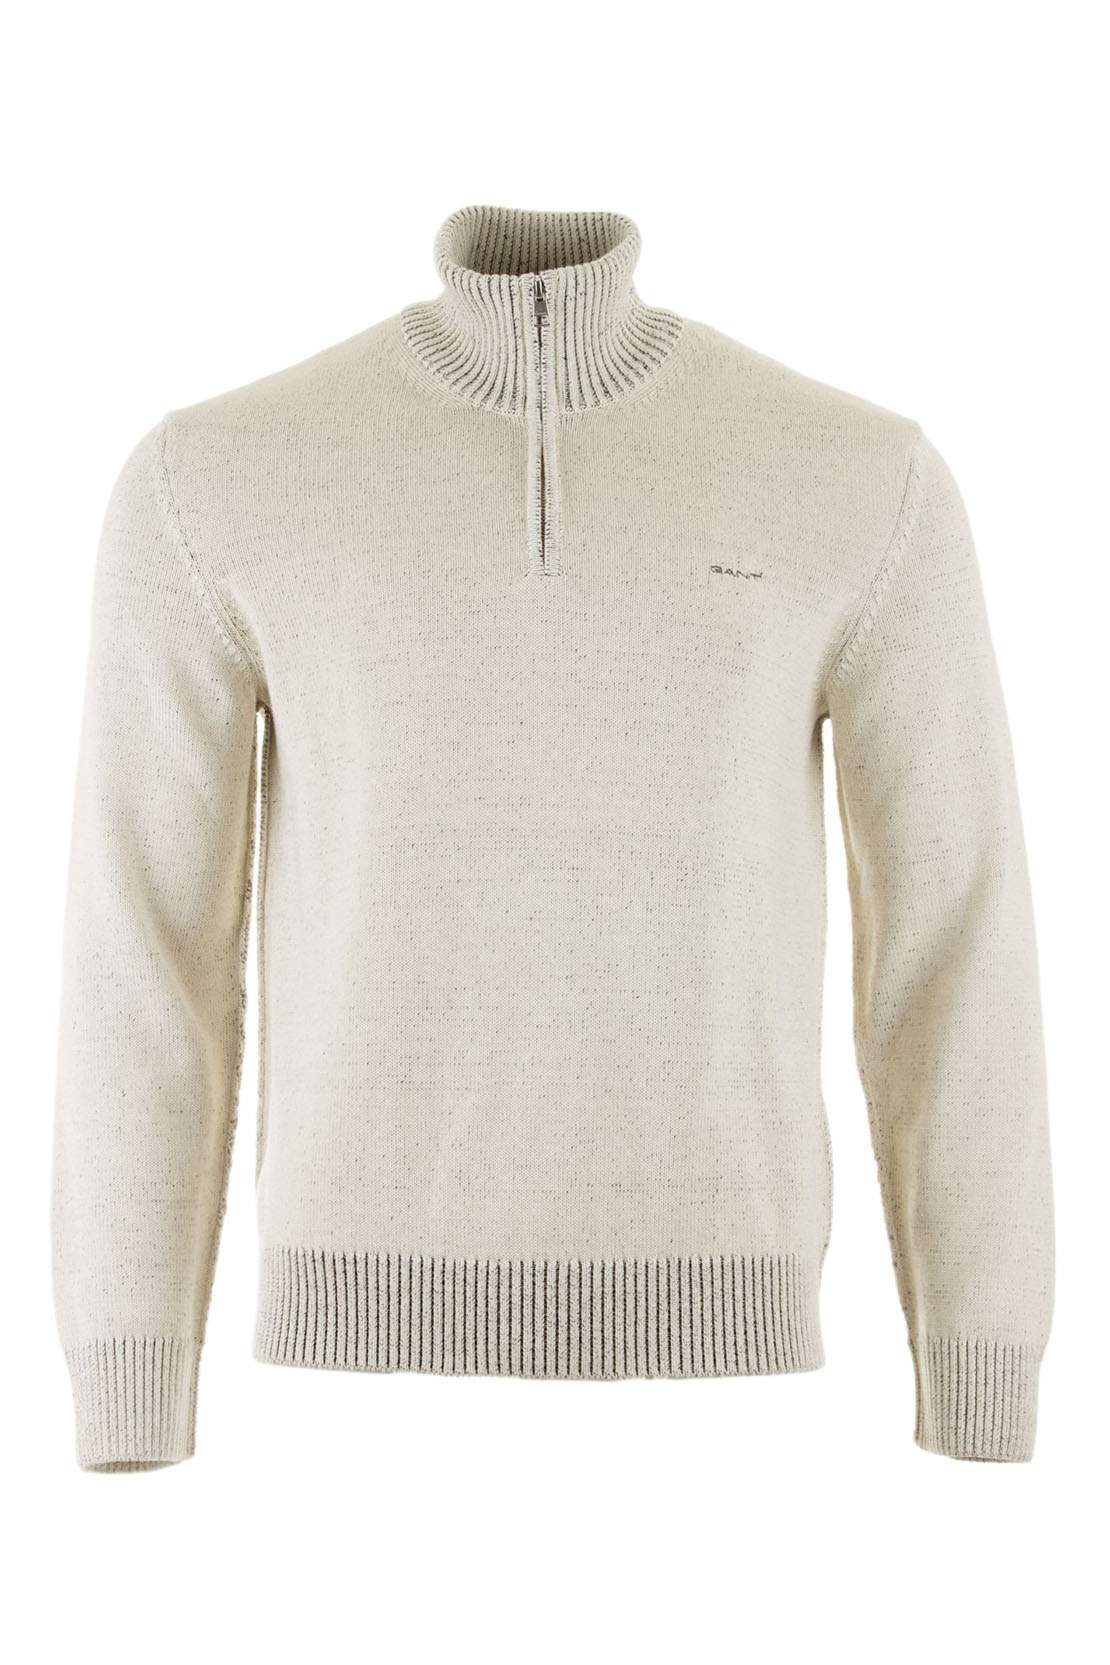 GANT - Plated Two Toned Cotton Half Zip in Off White 8030193 130